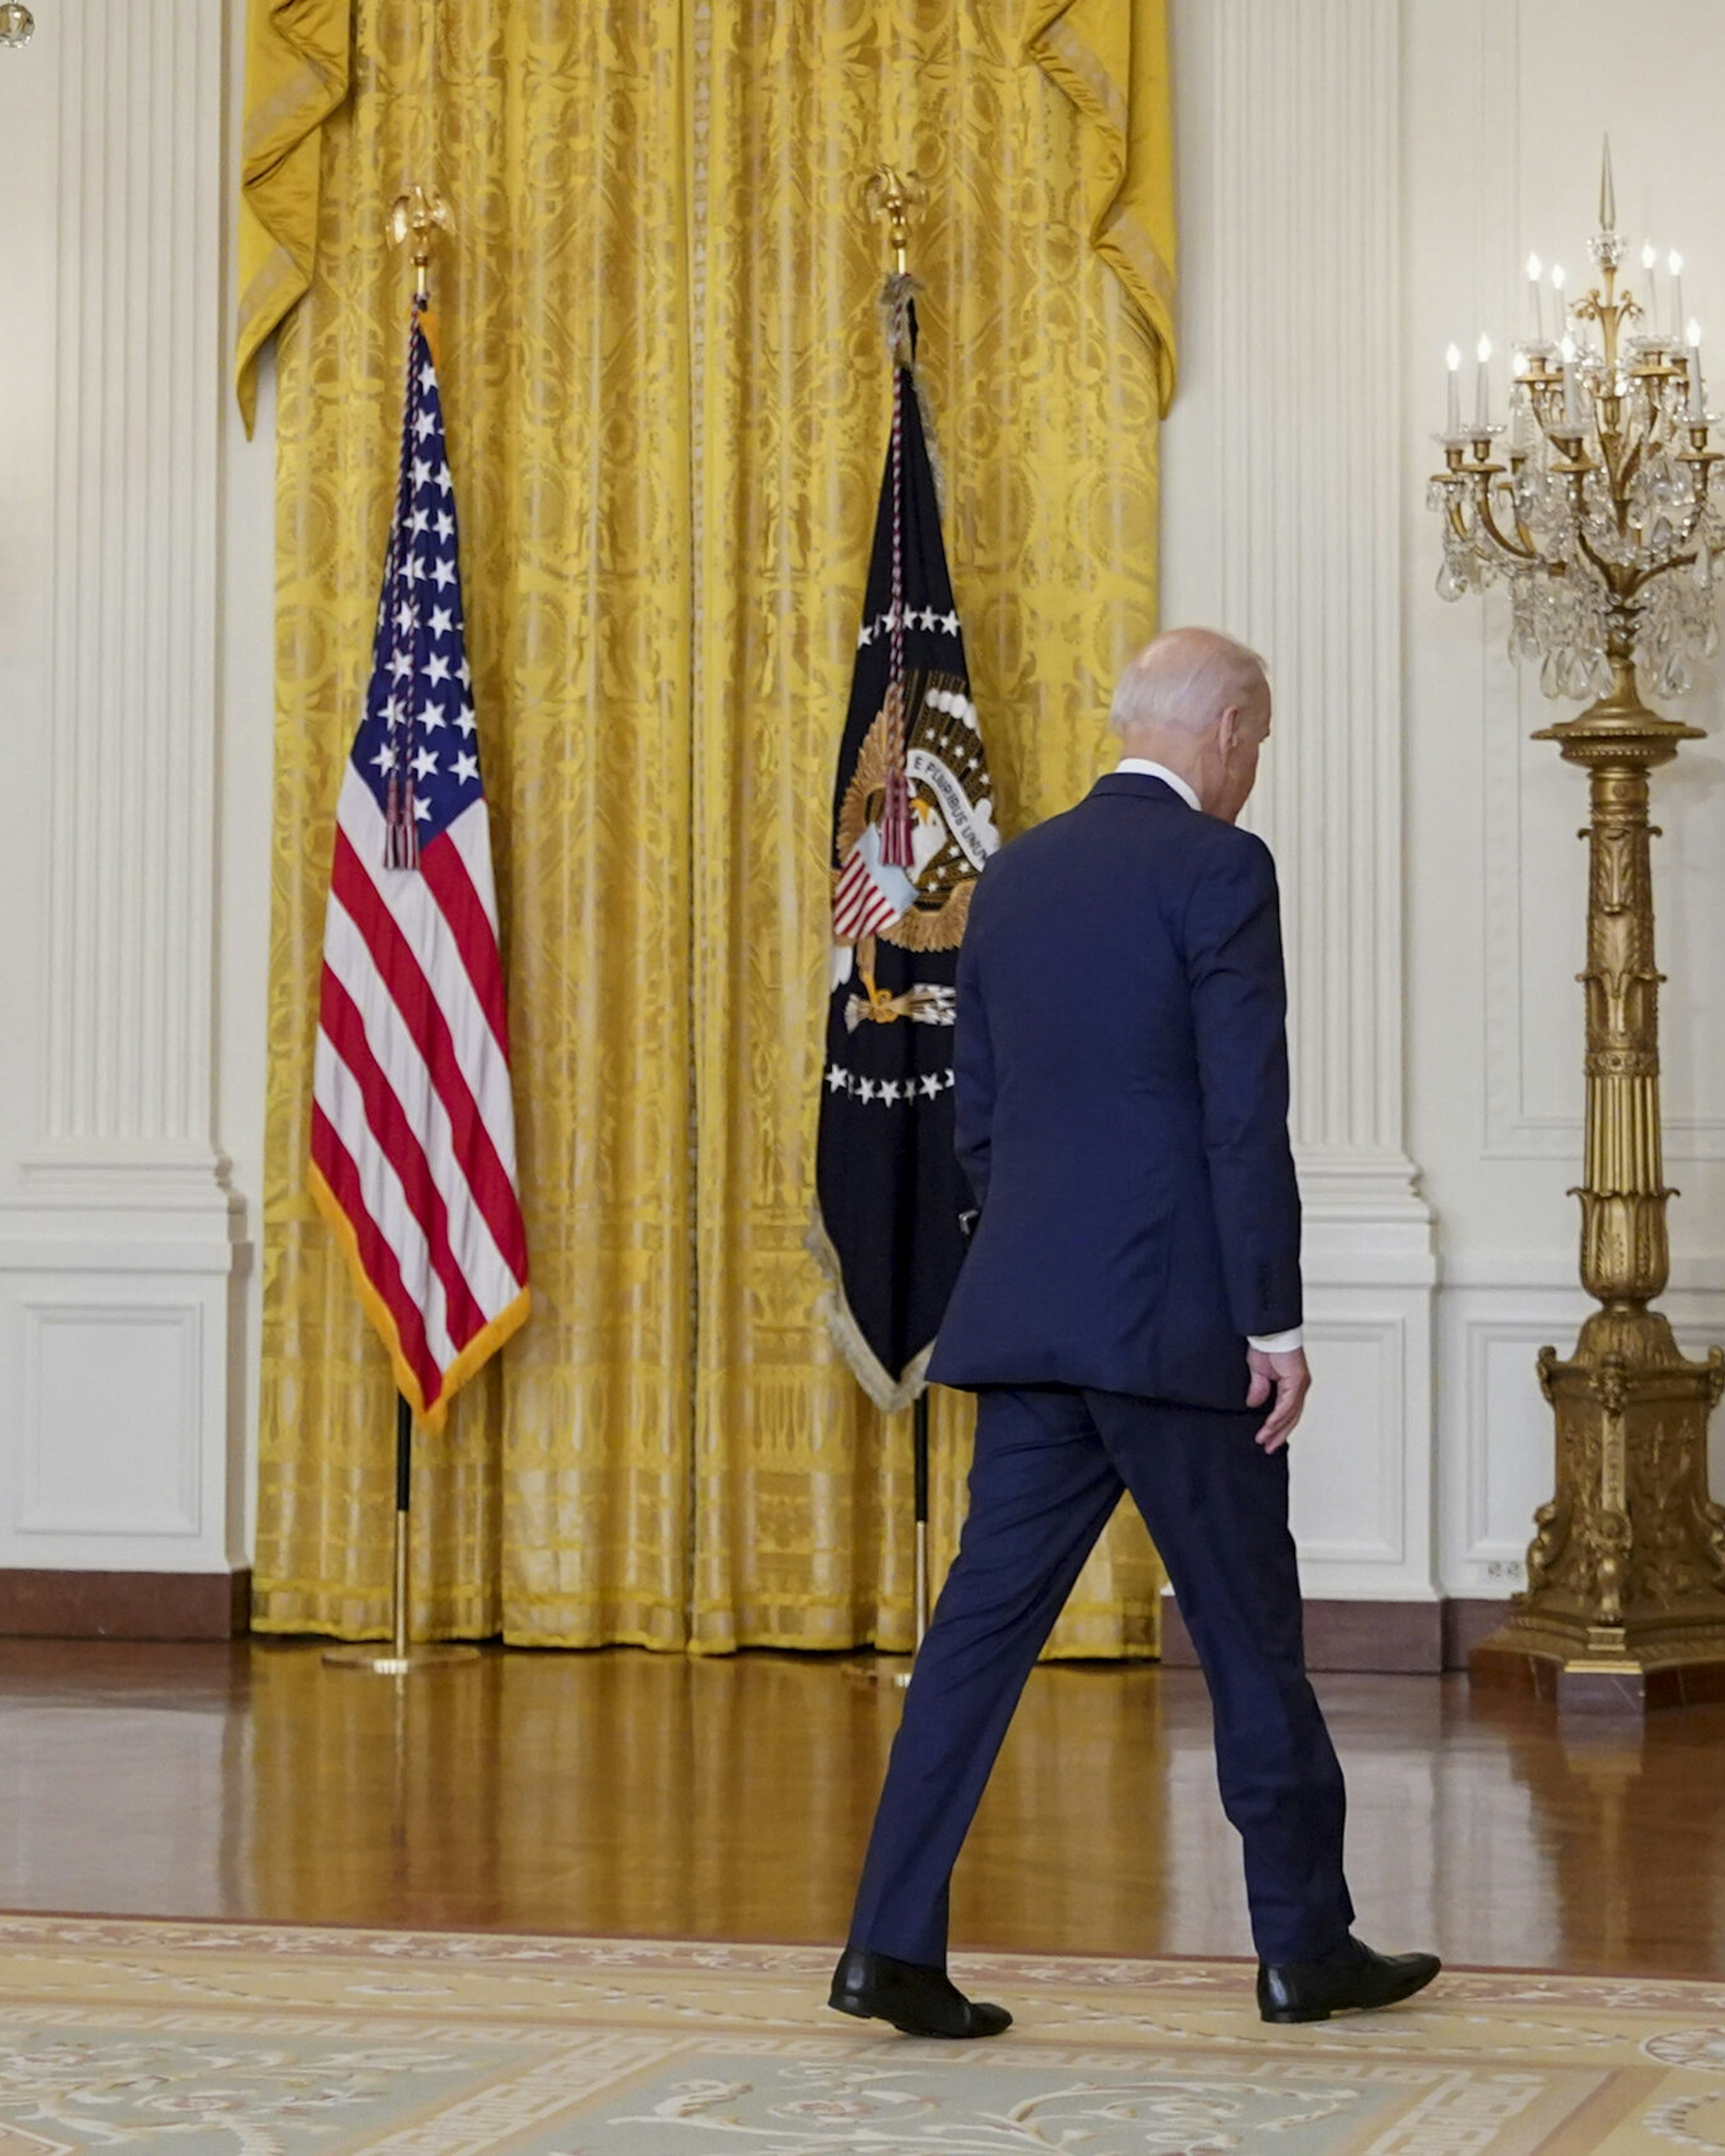 U.S. President Joe Biden exits after speaking in the East Room of the White House in Washington, D.C., U.S., on Thursday, Aug. 26, 2021. Biden vowed to continue evacuations from Afghanistan after explosions in Kabul killed 12 U.S. service members, and said the U.S. will retaliate against those responsible for the bombings. Photographer: Al Drago/Bloomberg via Getty Images